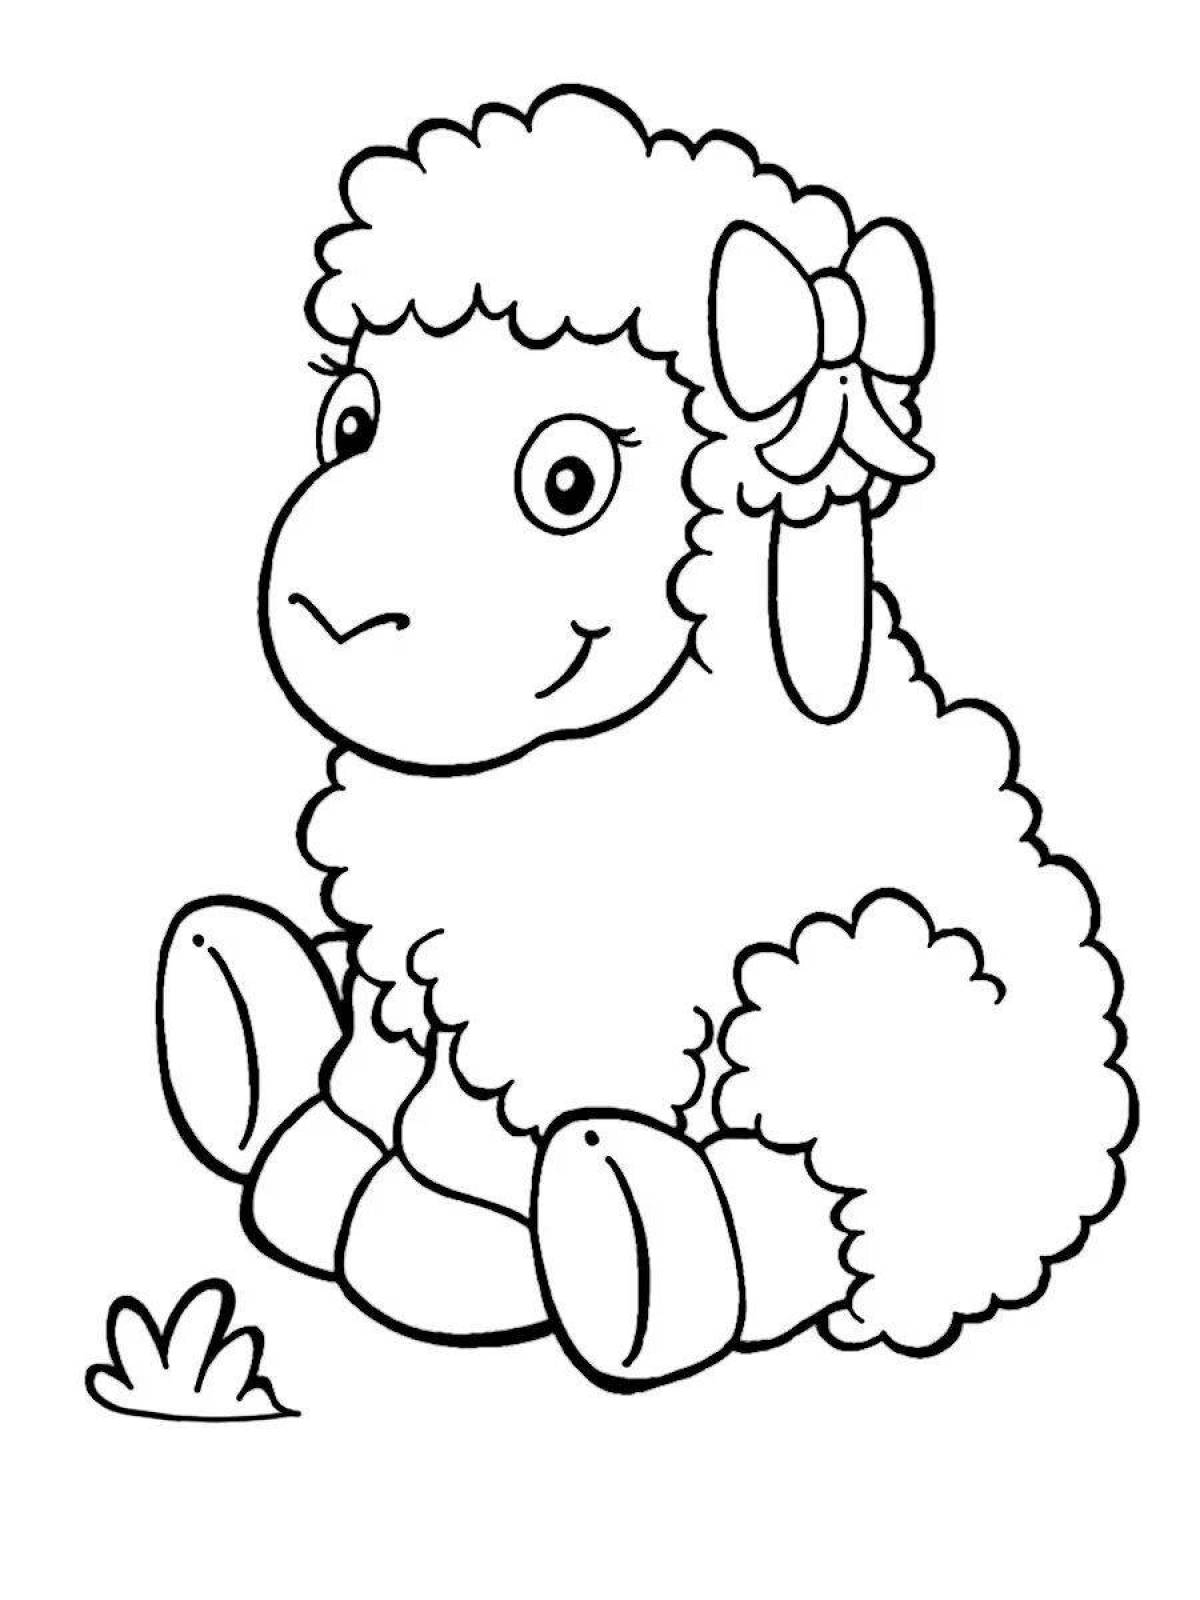 Cute sheep coloring book for 3-4 year olds